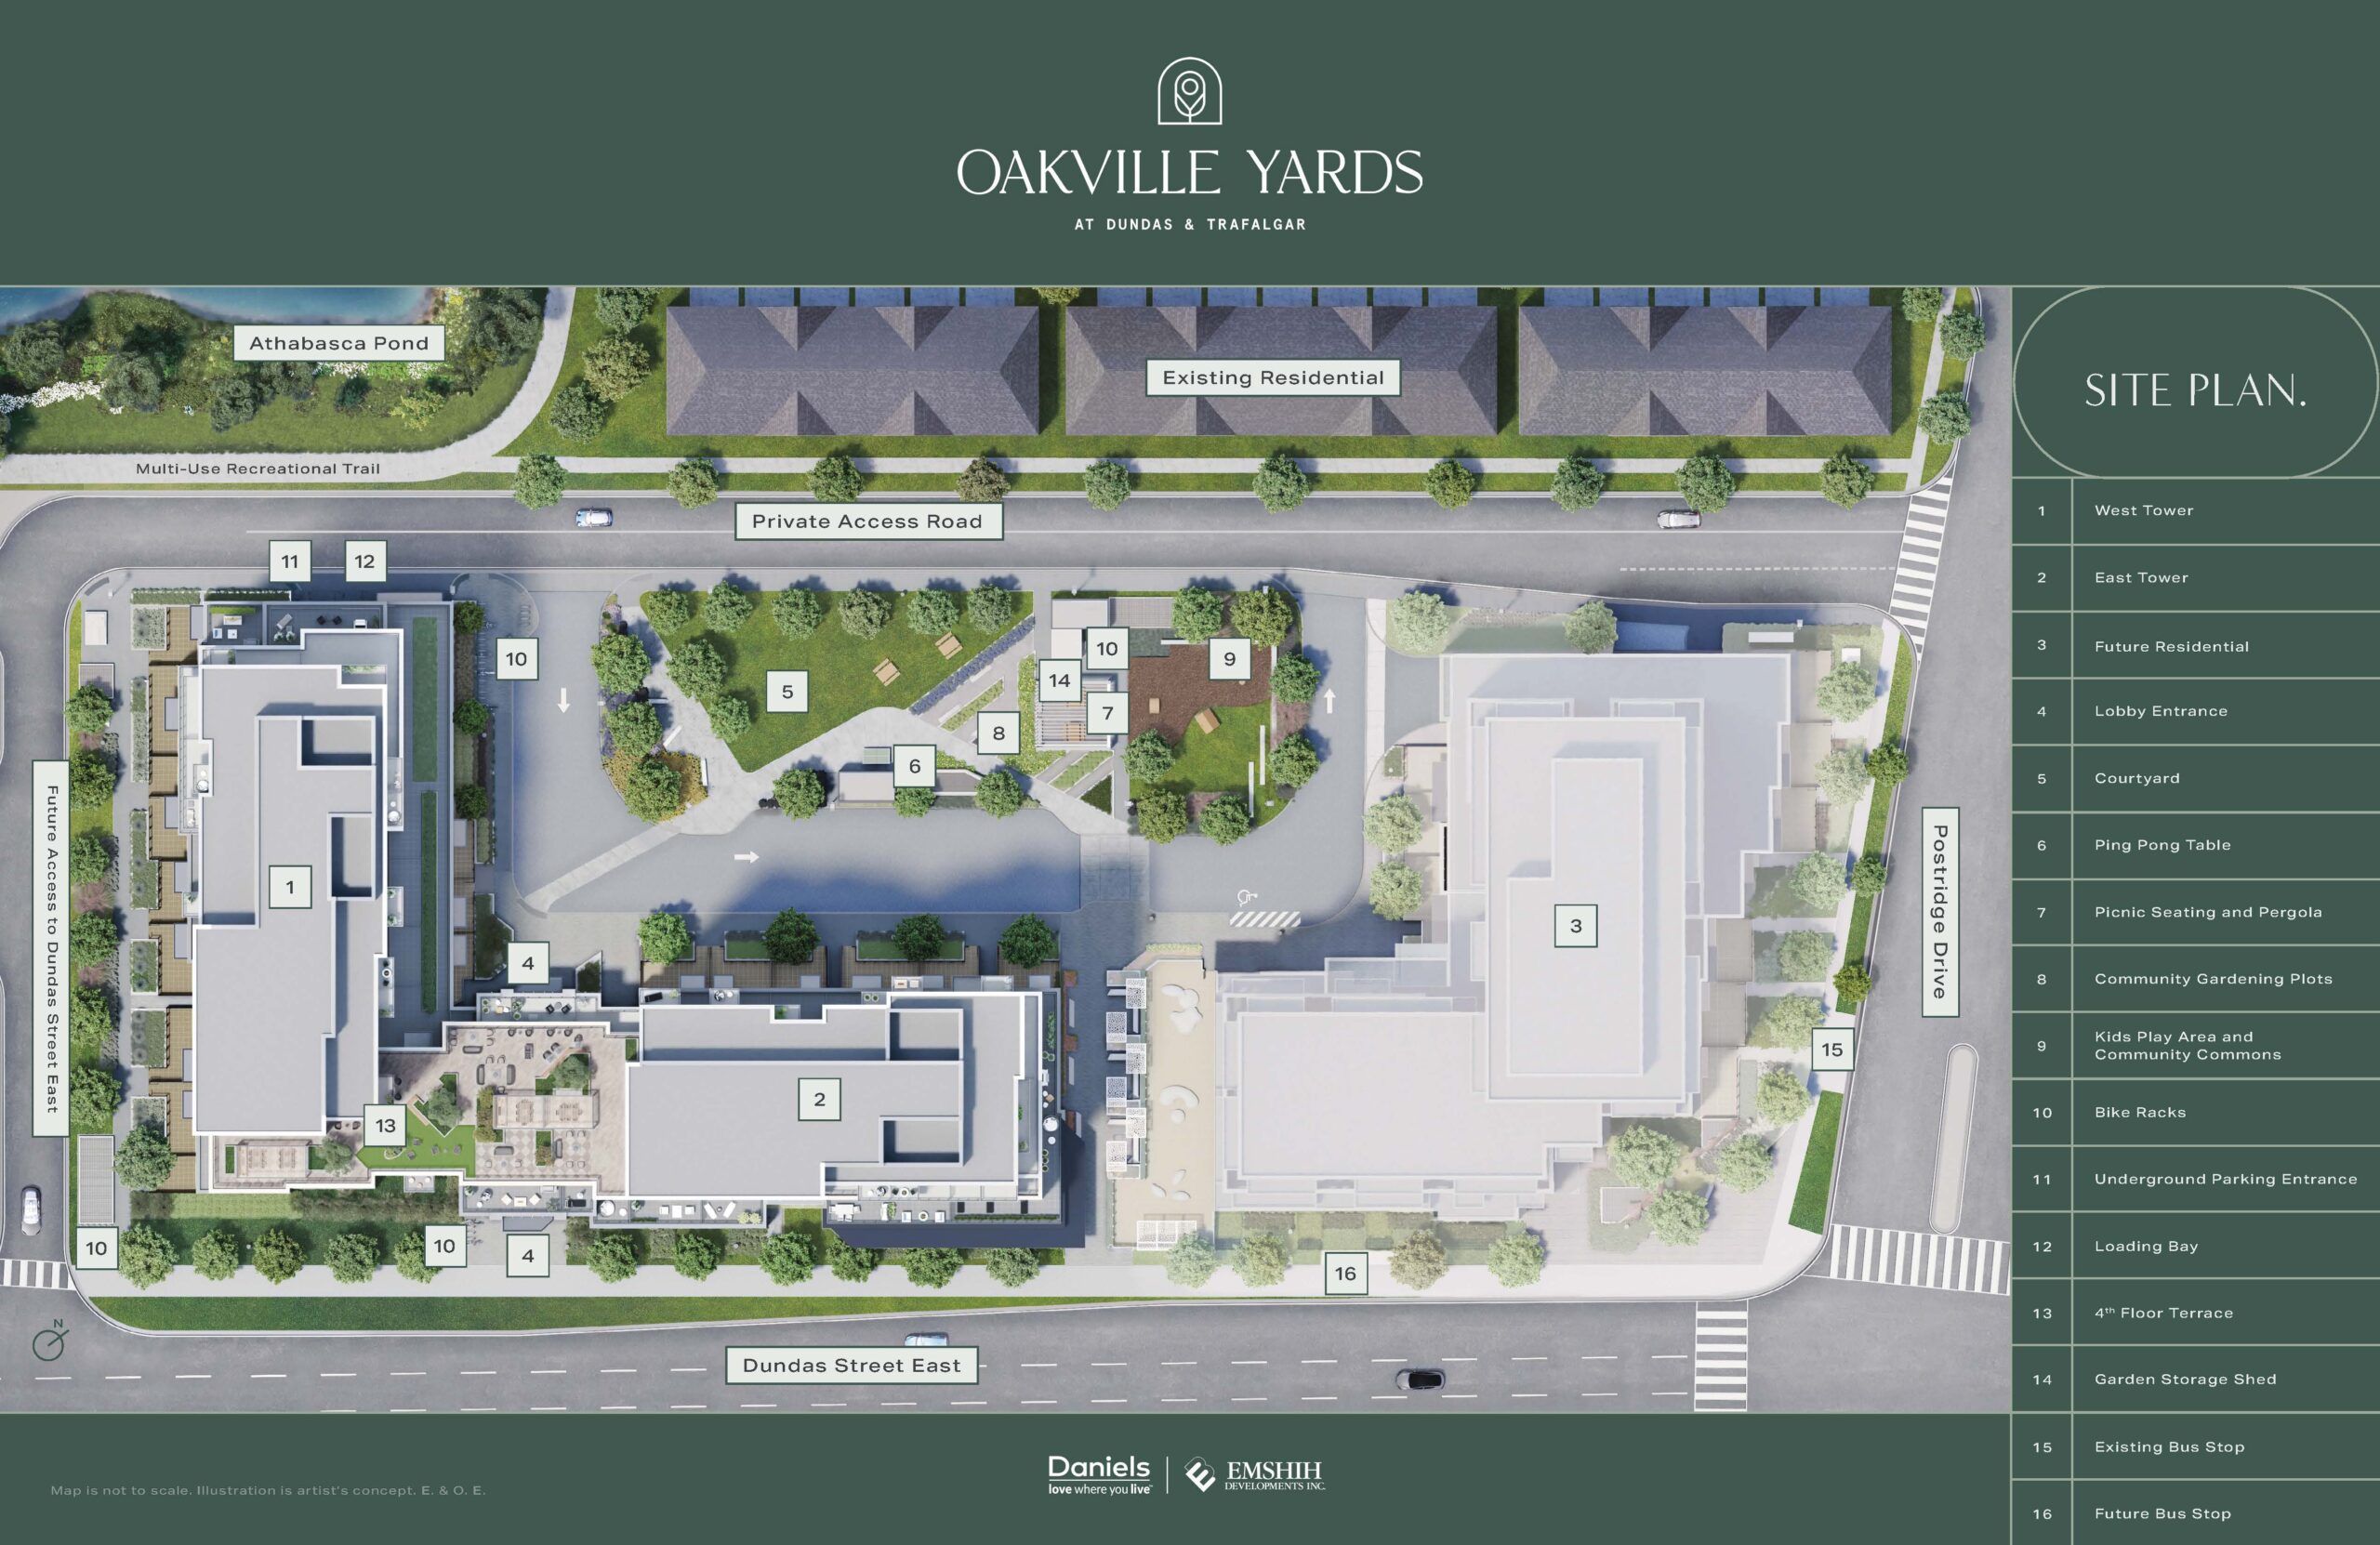 Aerial view of Oakville Yards site plan with labels.